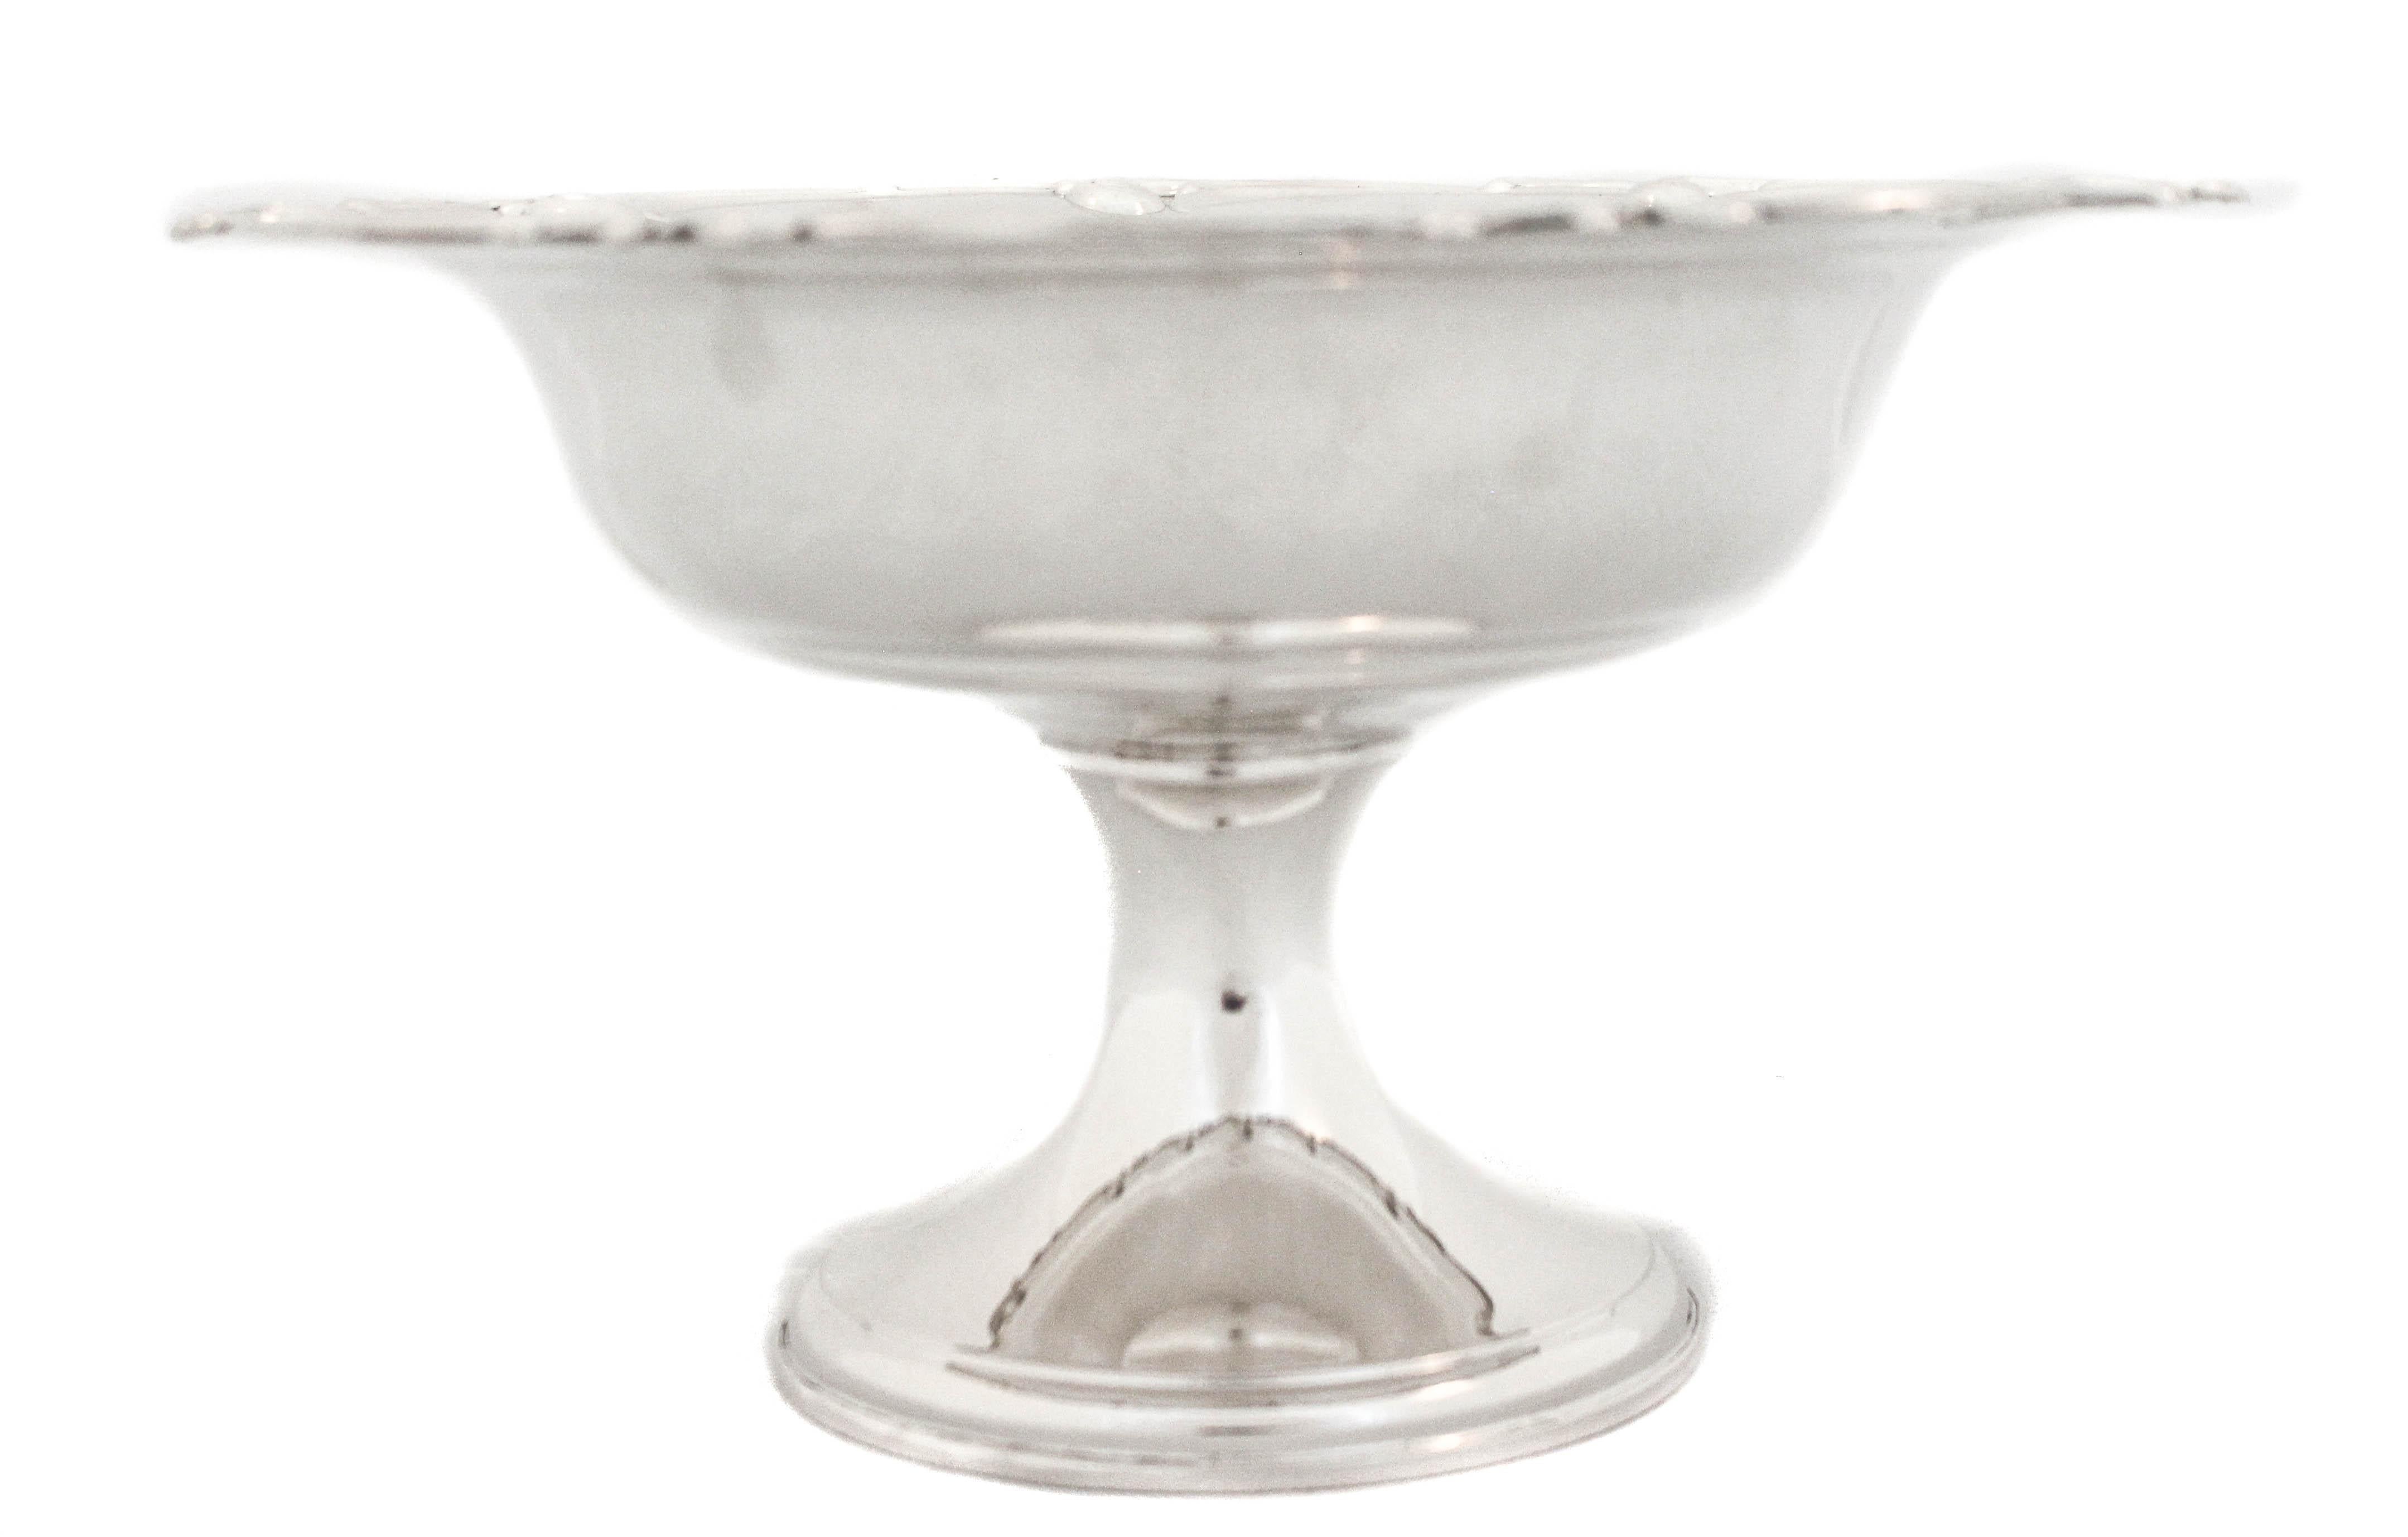 Being offered is a sterling silver bowl on a pedestal. Manufactured by the International Silver Company in the 1930’s, it has a scalloped edge with a swirl pattern. The bowl is deep and can hold a substantial amount. Would look beautiful on a